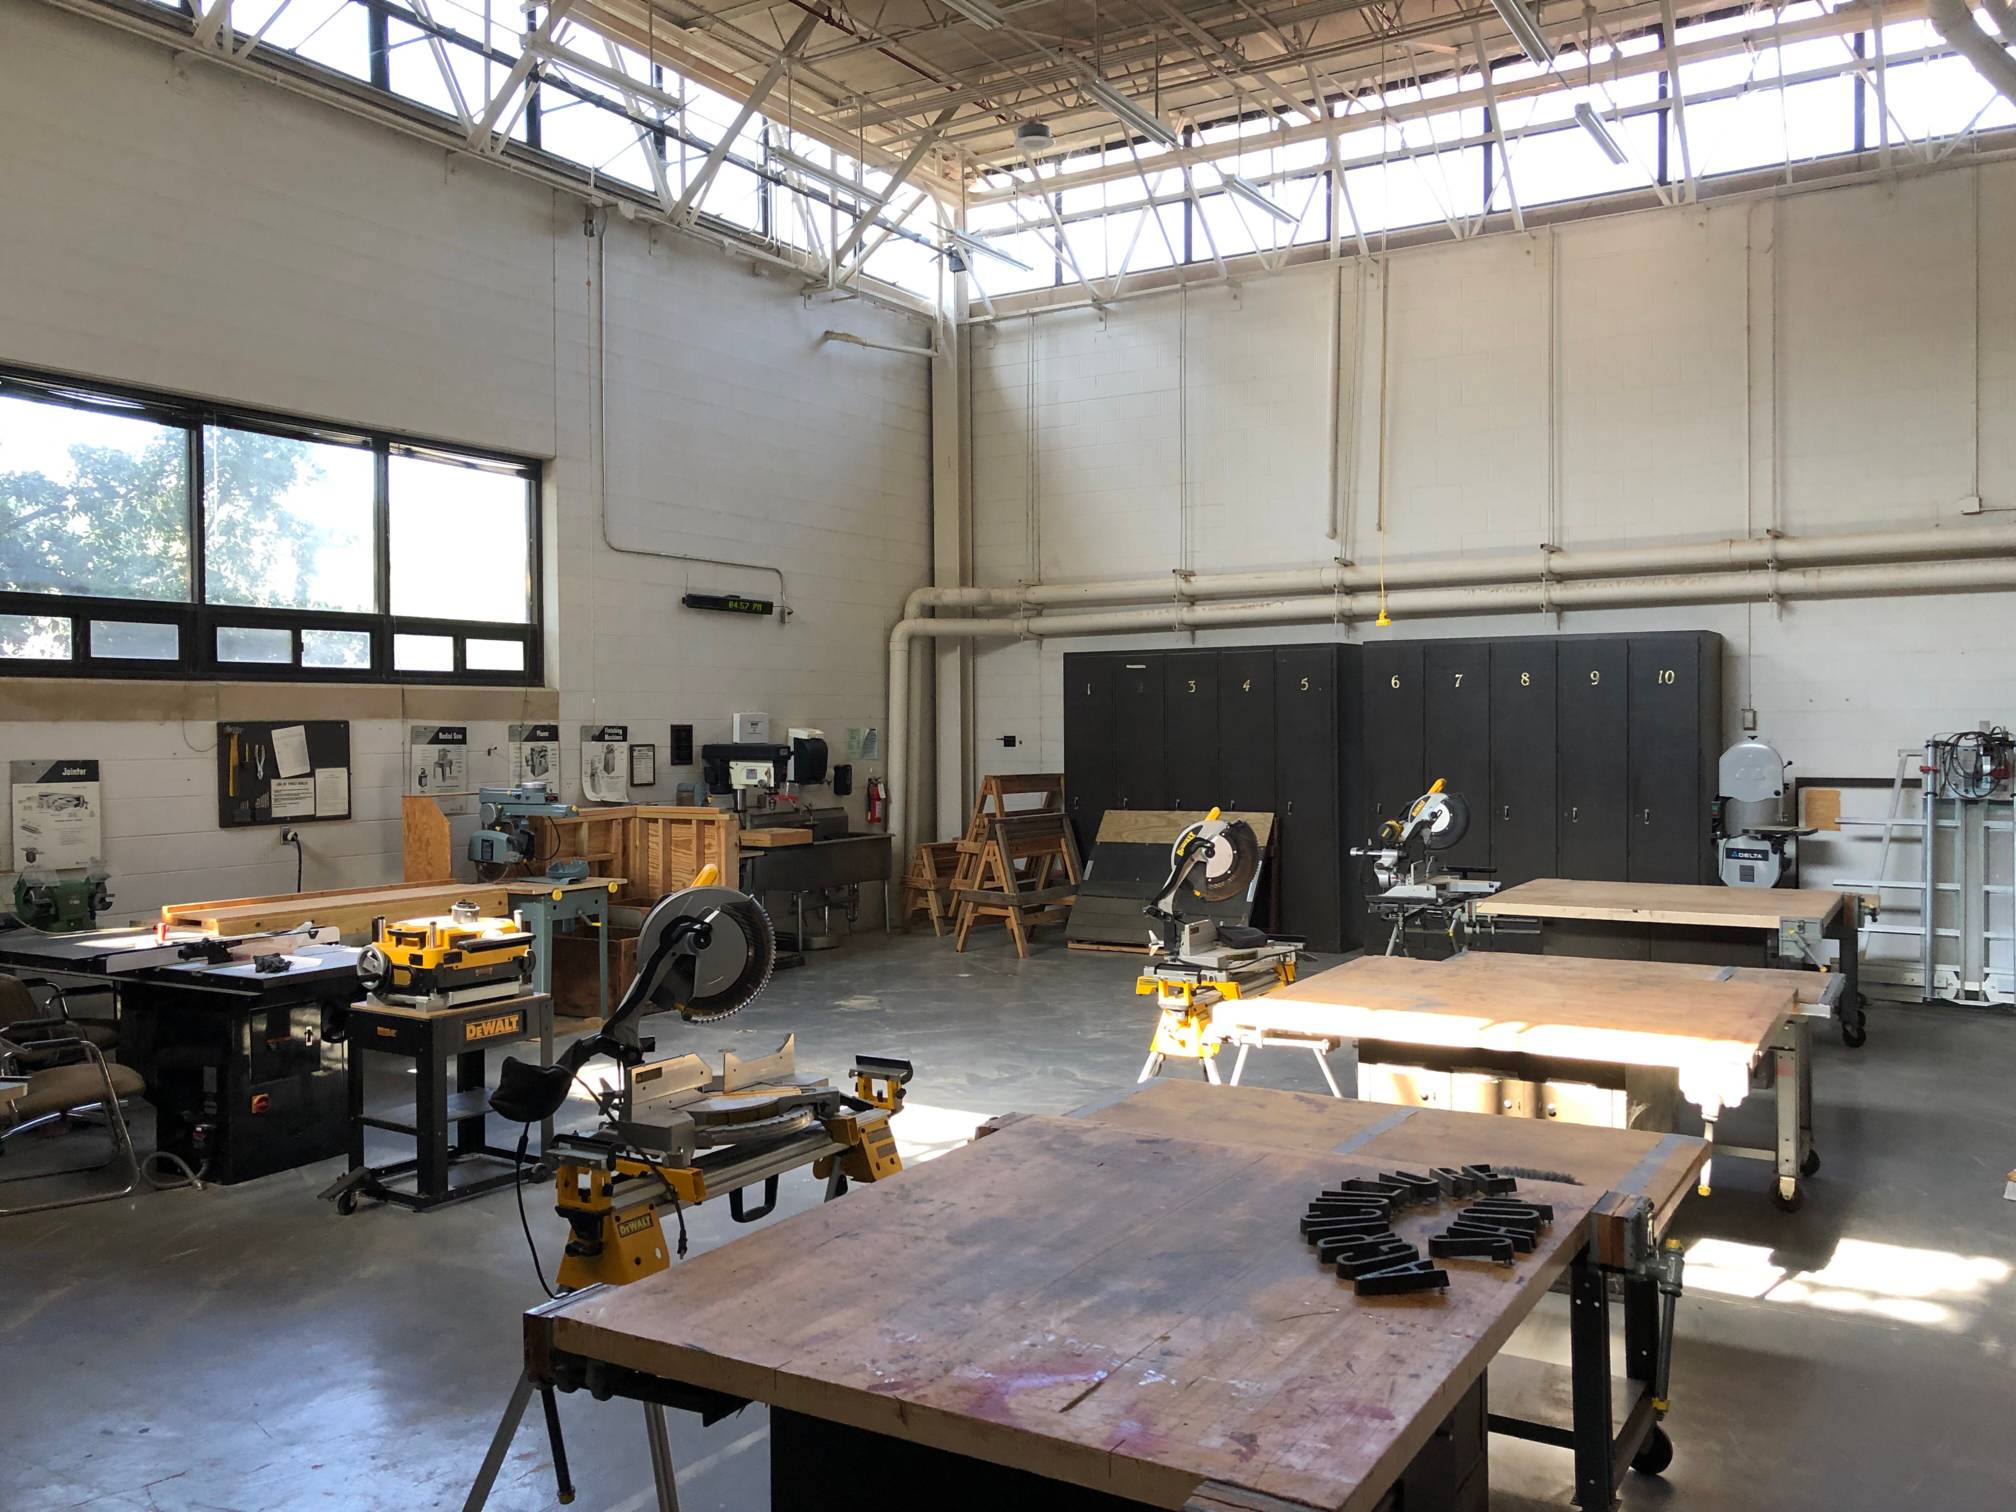 Large room with power tools, tables, and construction equipment